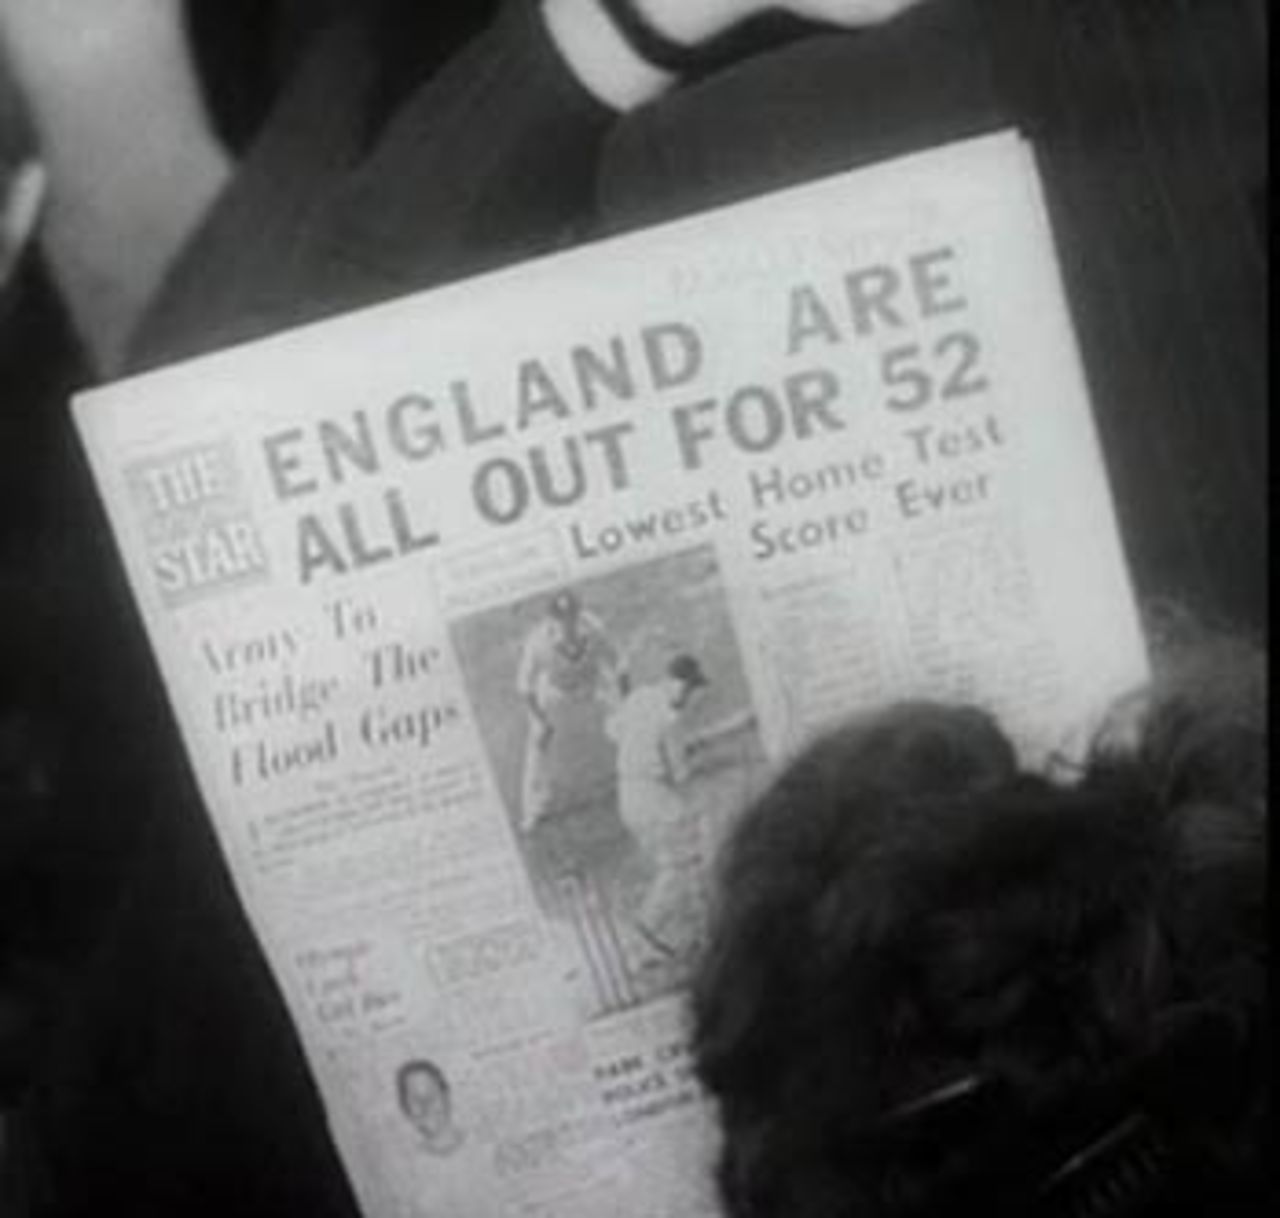 The newspaper tells the story after England were bowled out for 52, England v Australia, 5th Test, The Oval, August 1948